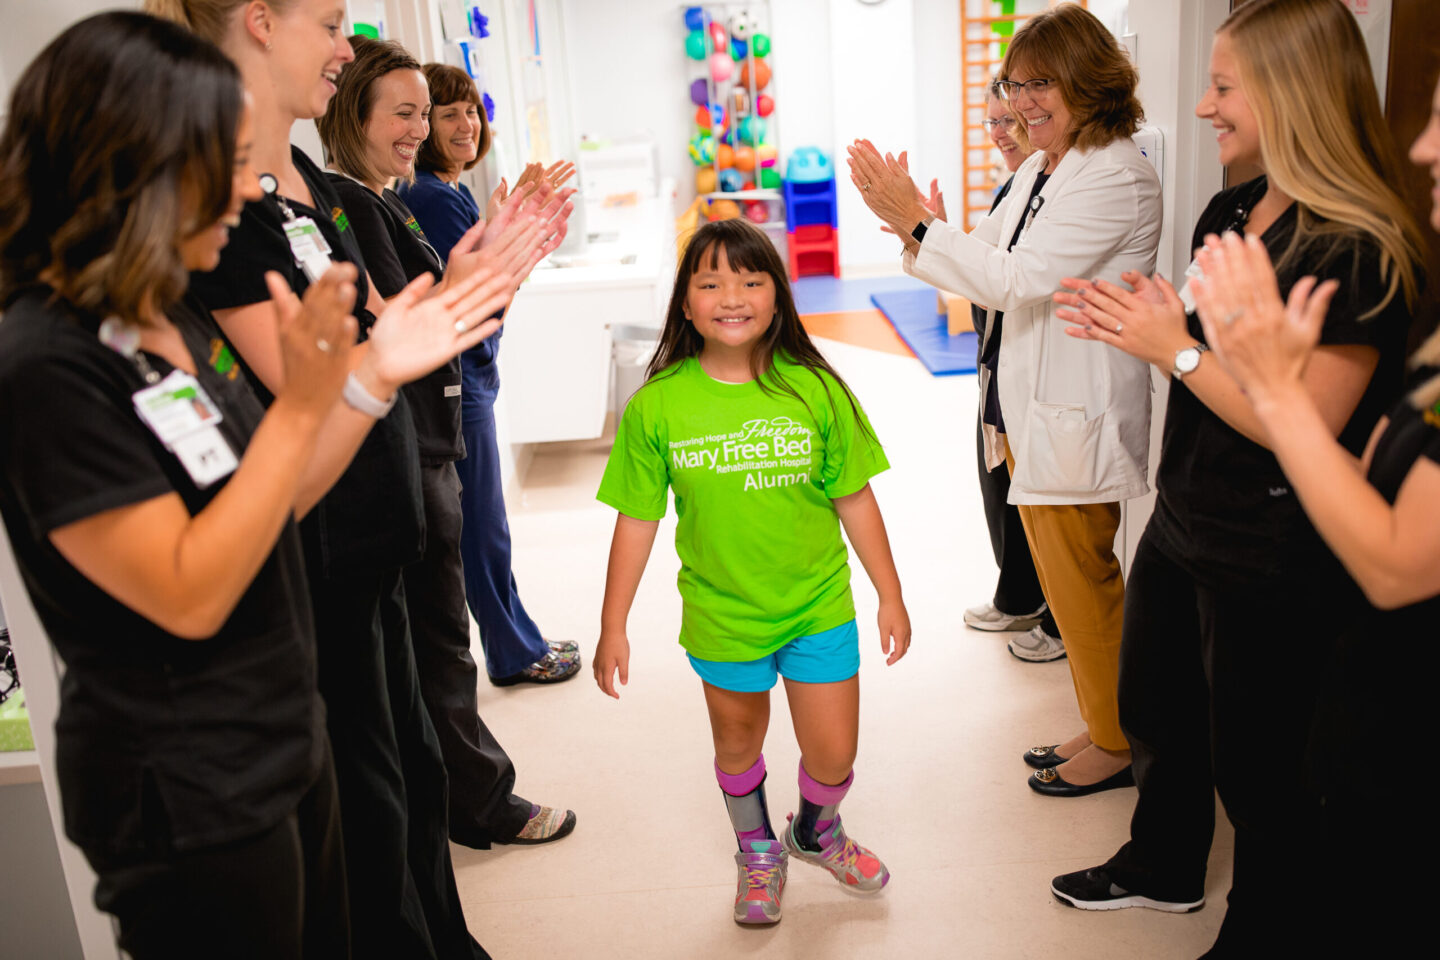 A young girl with leg braces walks confidently through a hallway as staff applaud her progress